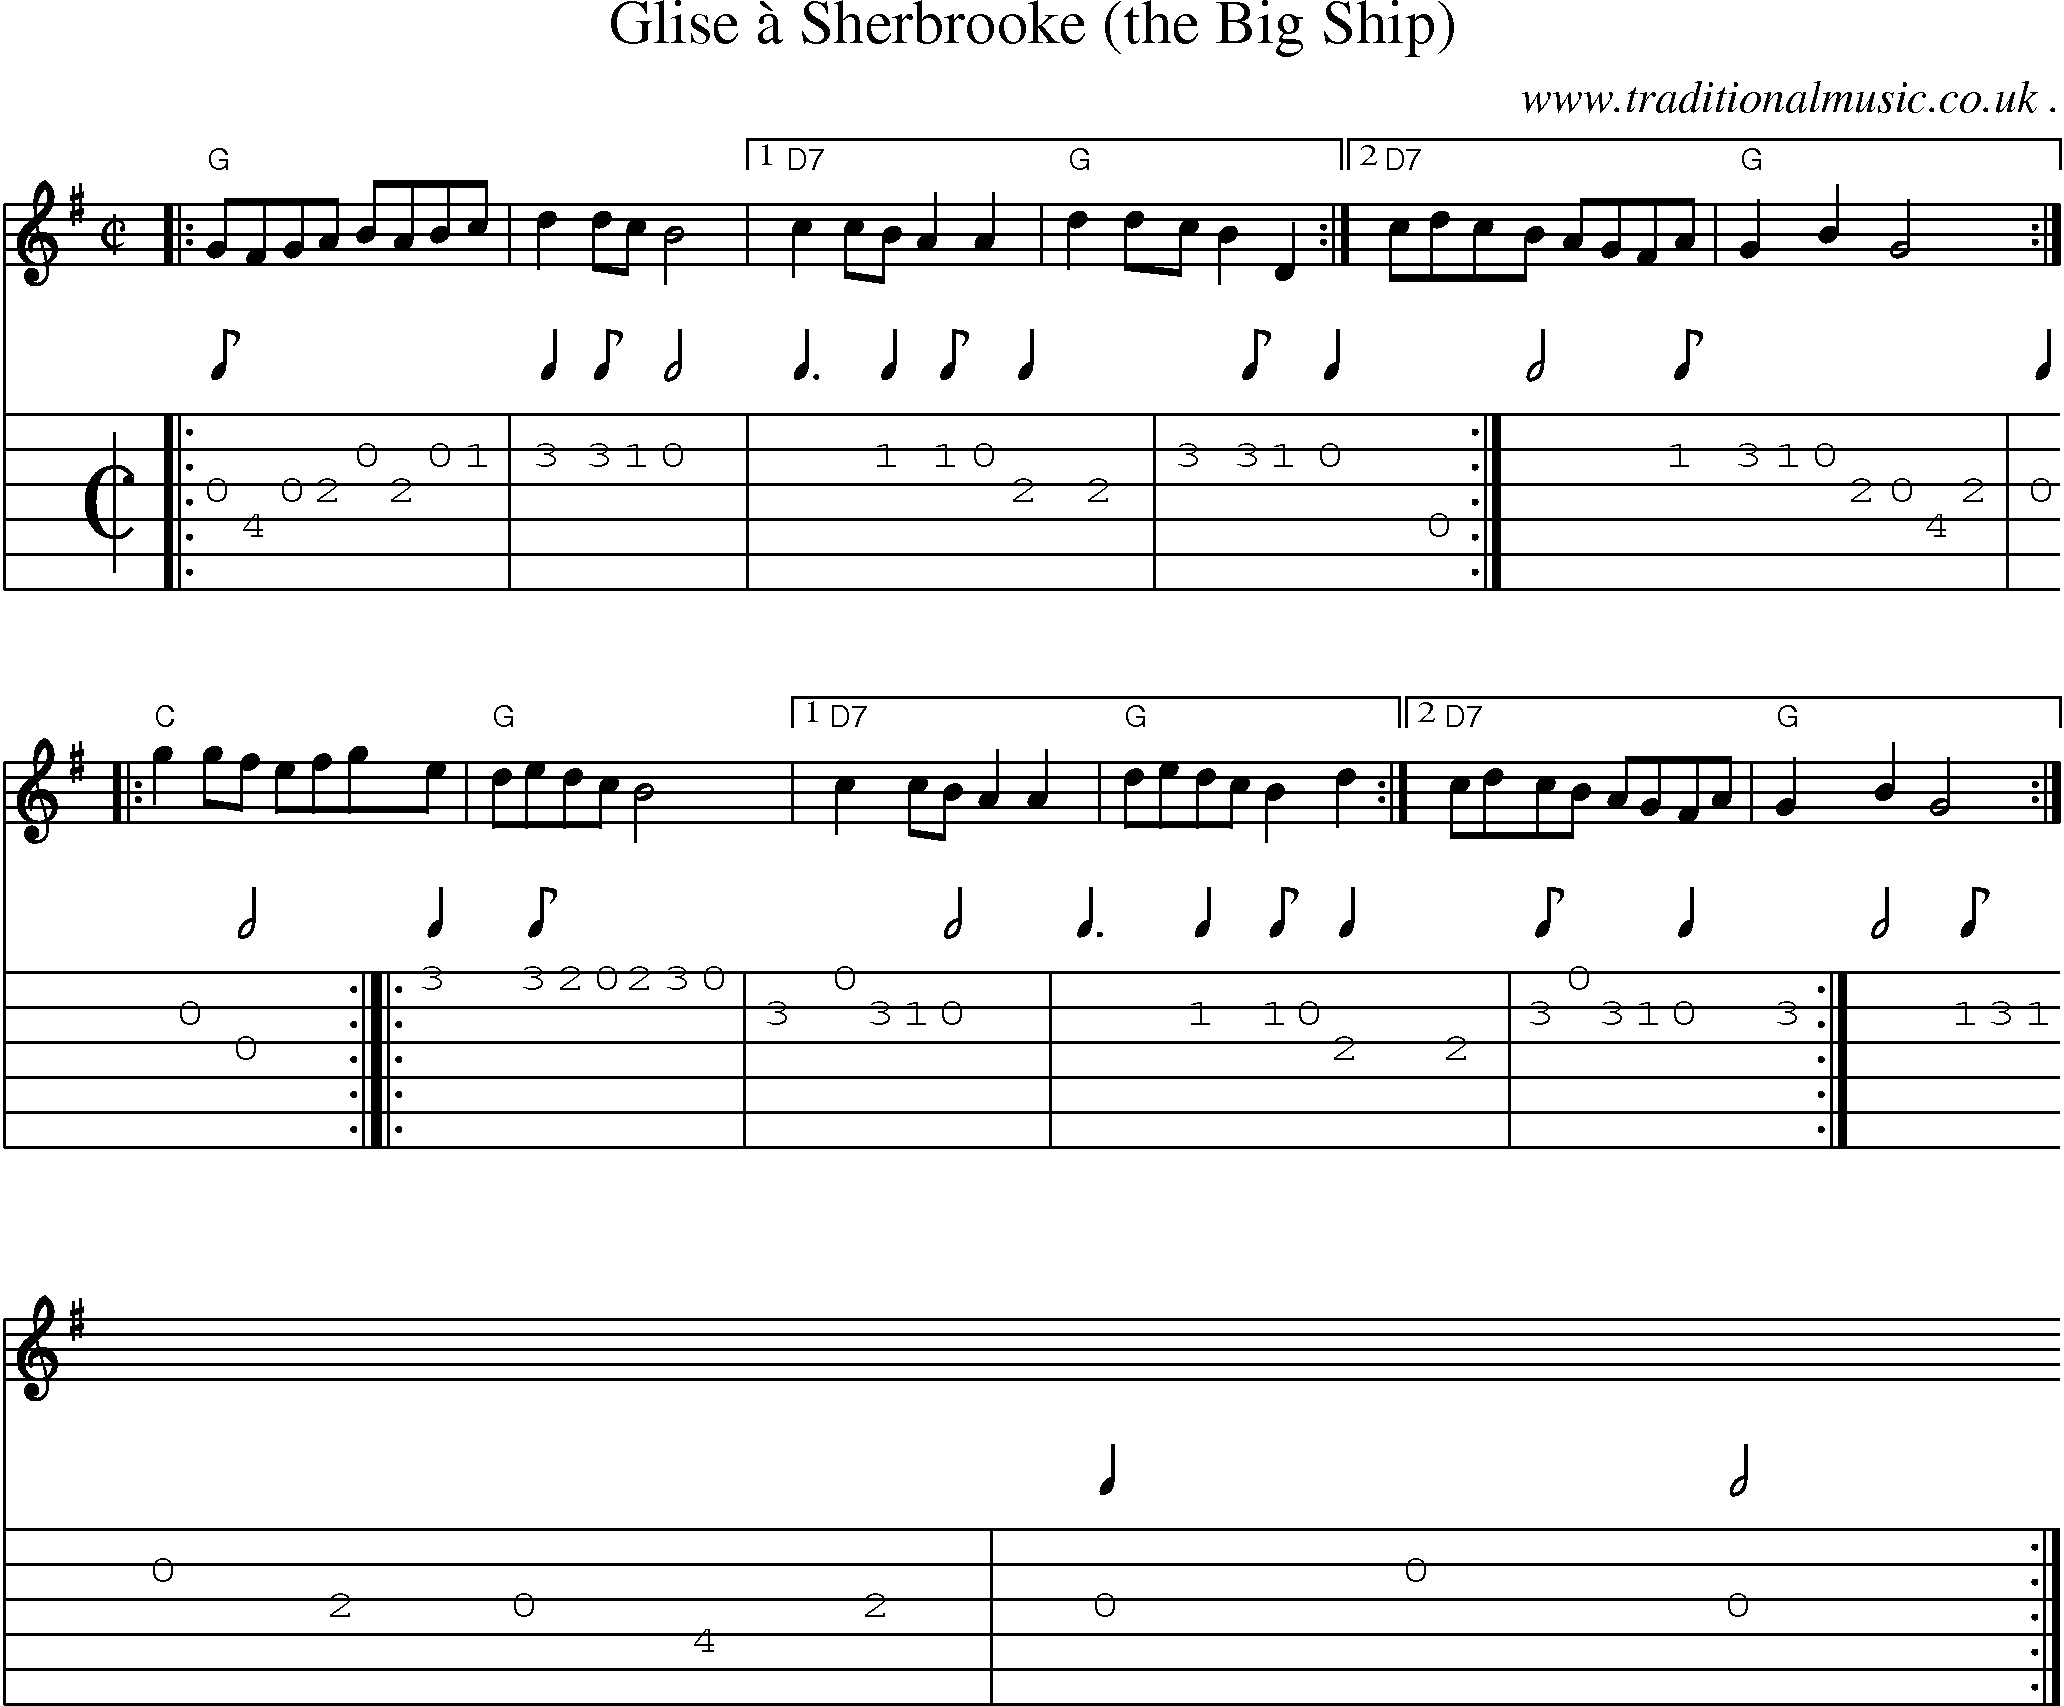 Sheet-music  score, Chords and Guitar Tabs for Glise A Sherbrooke The Big Ship